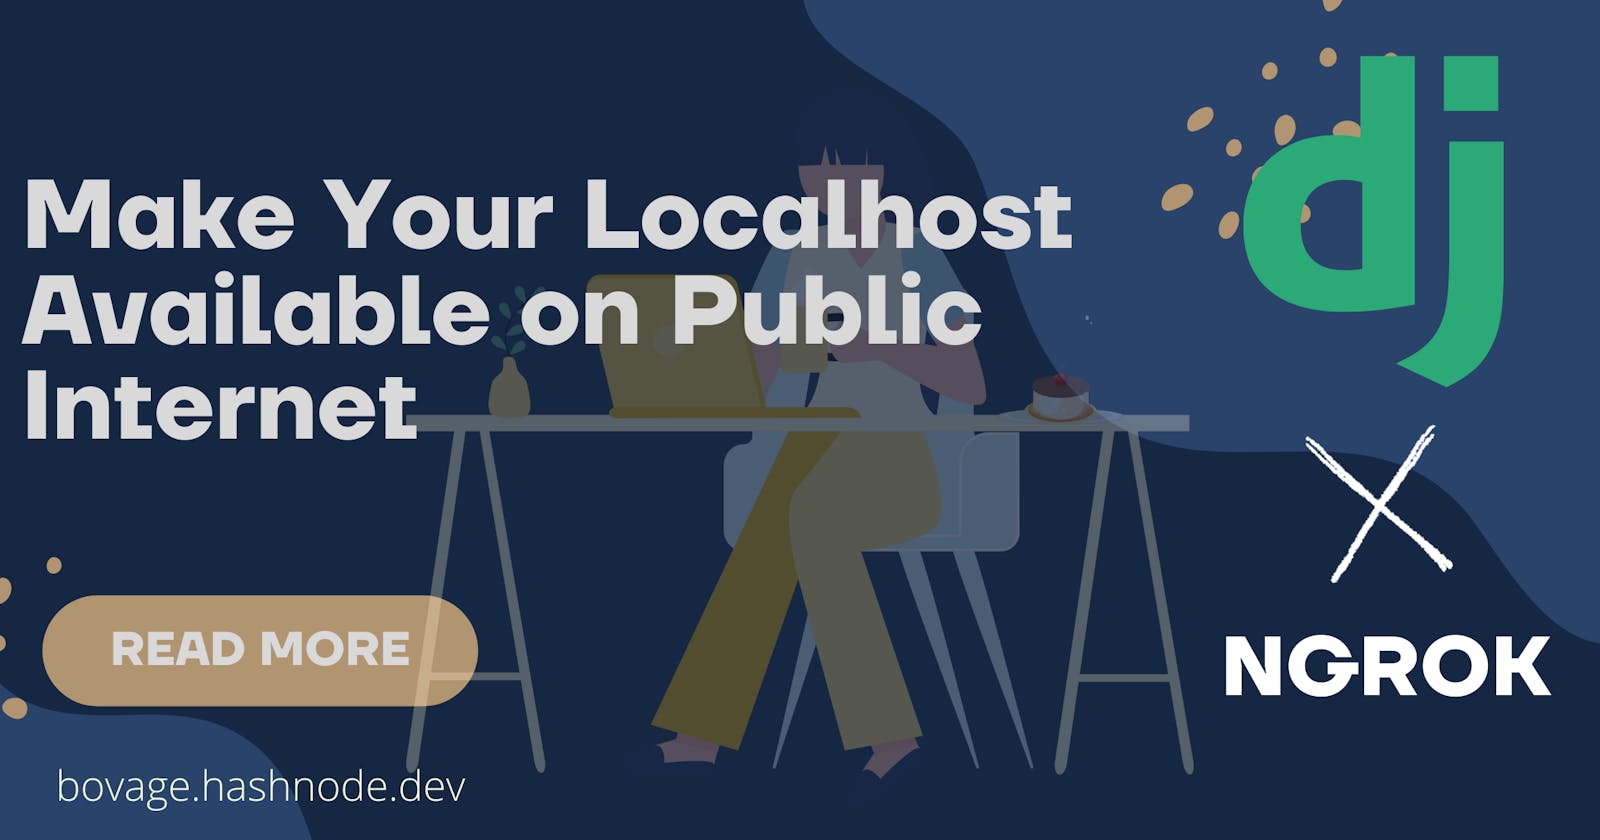 Make your localhost available on Public Internet